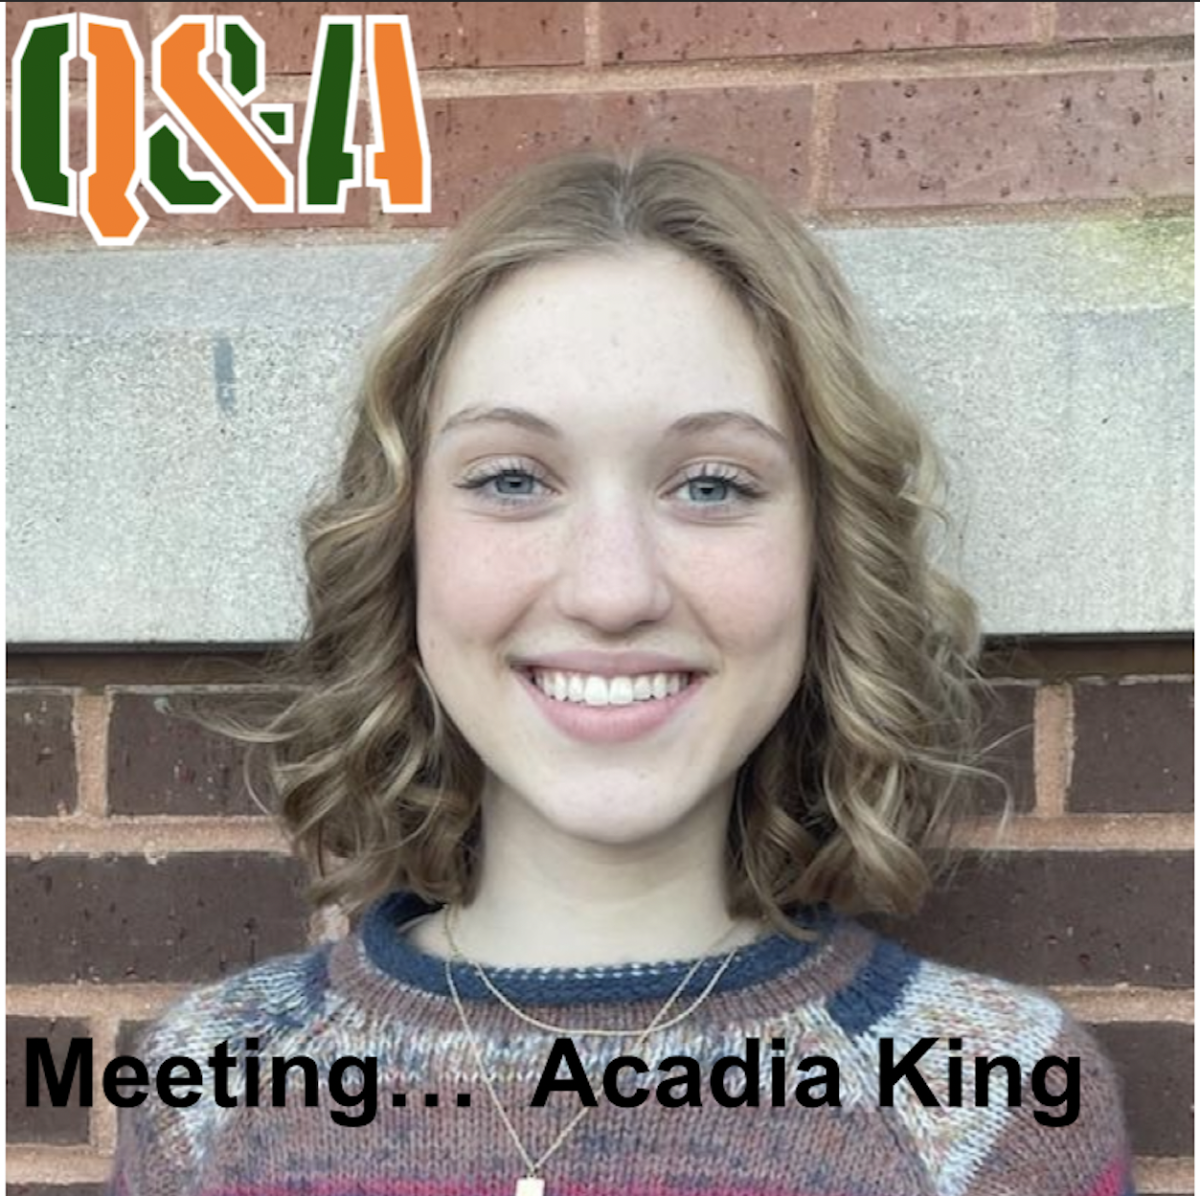 Meeting...Acadia King, 2027 Student and Actor